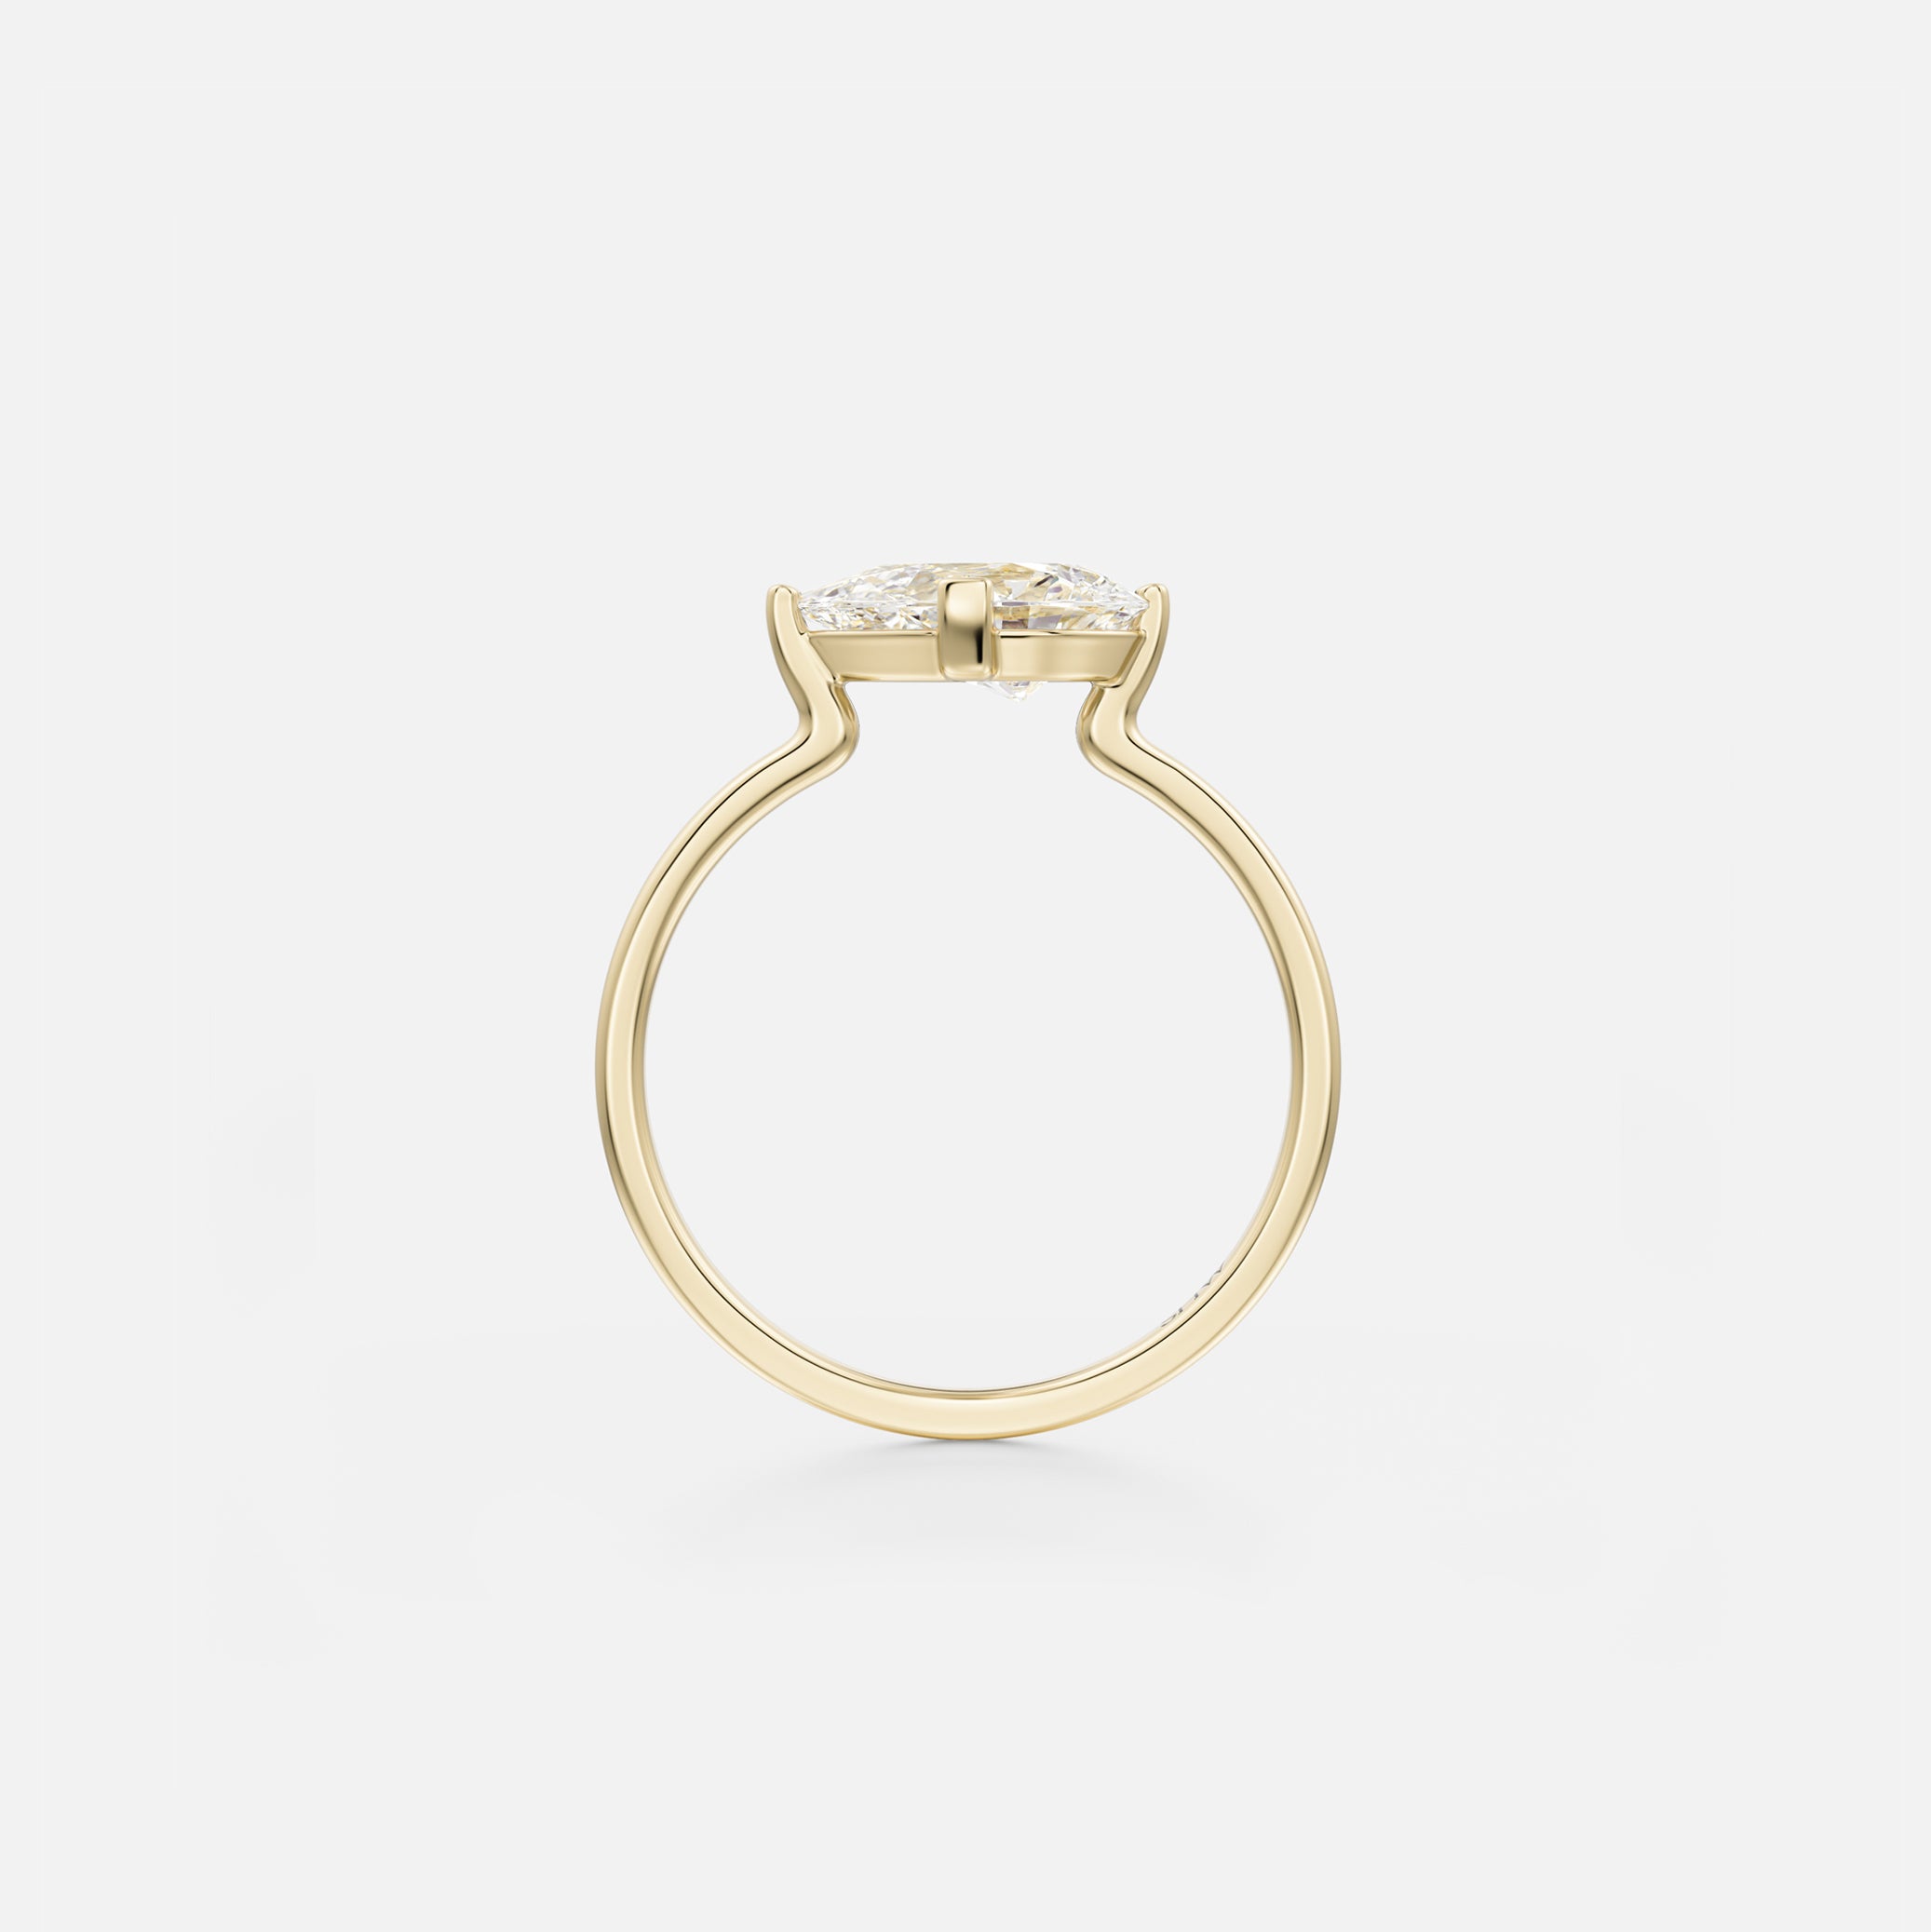 Ema Flat Band with East West Pear Modern Engagement Ring Setting in 14 karat yellow, white, rose Gold or platinum handcrafted by SHW Fine Jewelry NYC